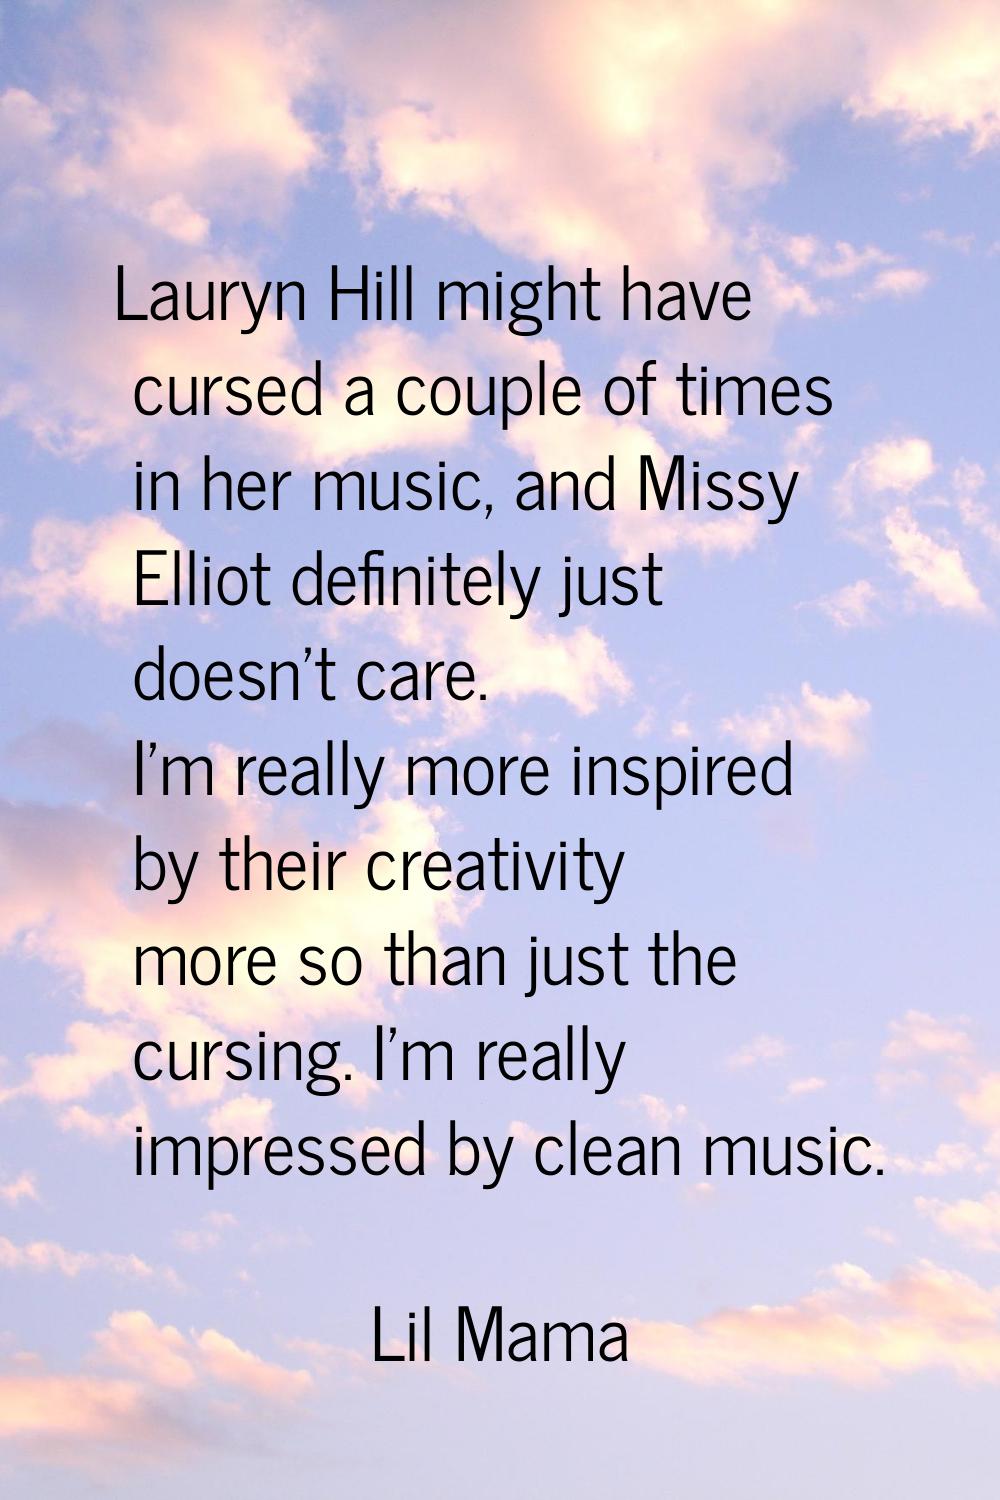 Lauryn Hill might have cursed a couple of times in her music, and Missy Elliot definitely just does